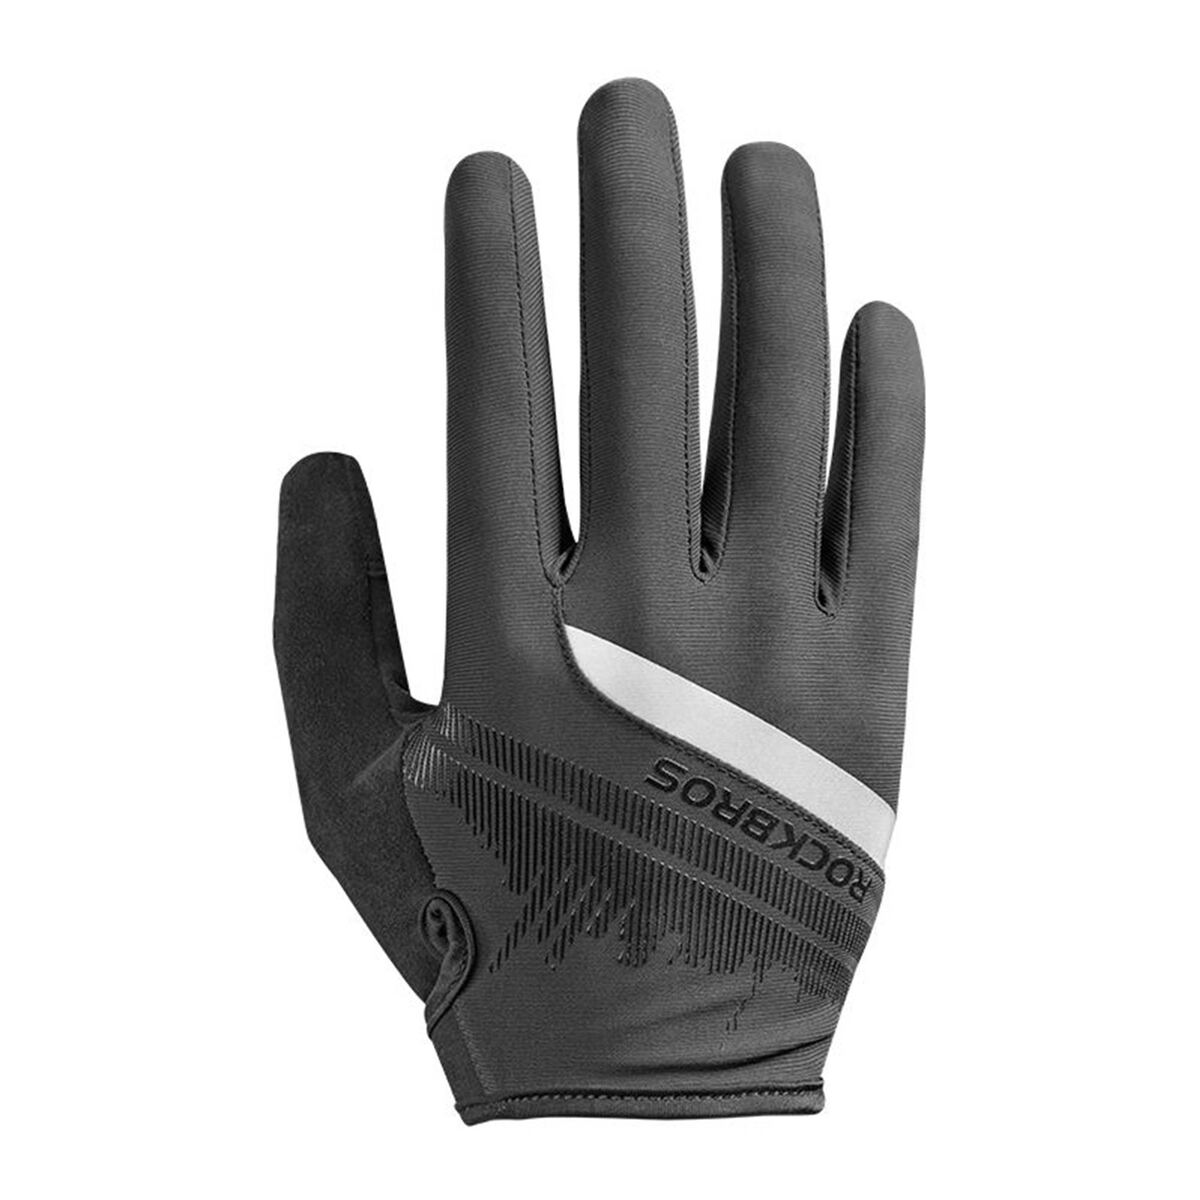 ROCKBROS Touch Screen Cycling Gloves S247-1 Medium